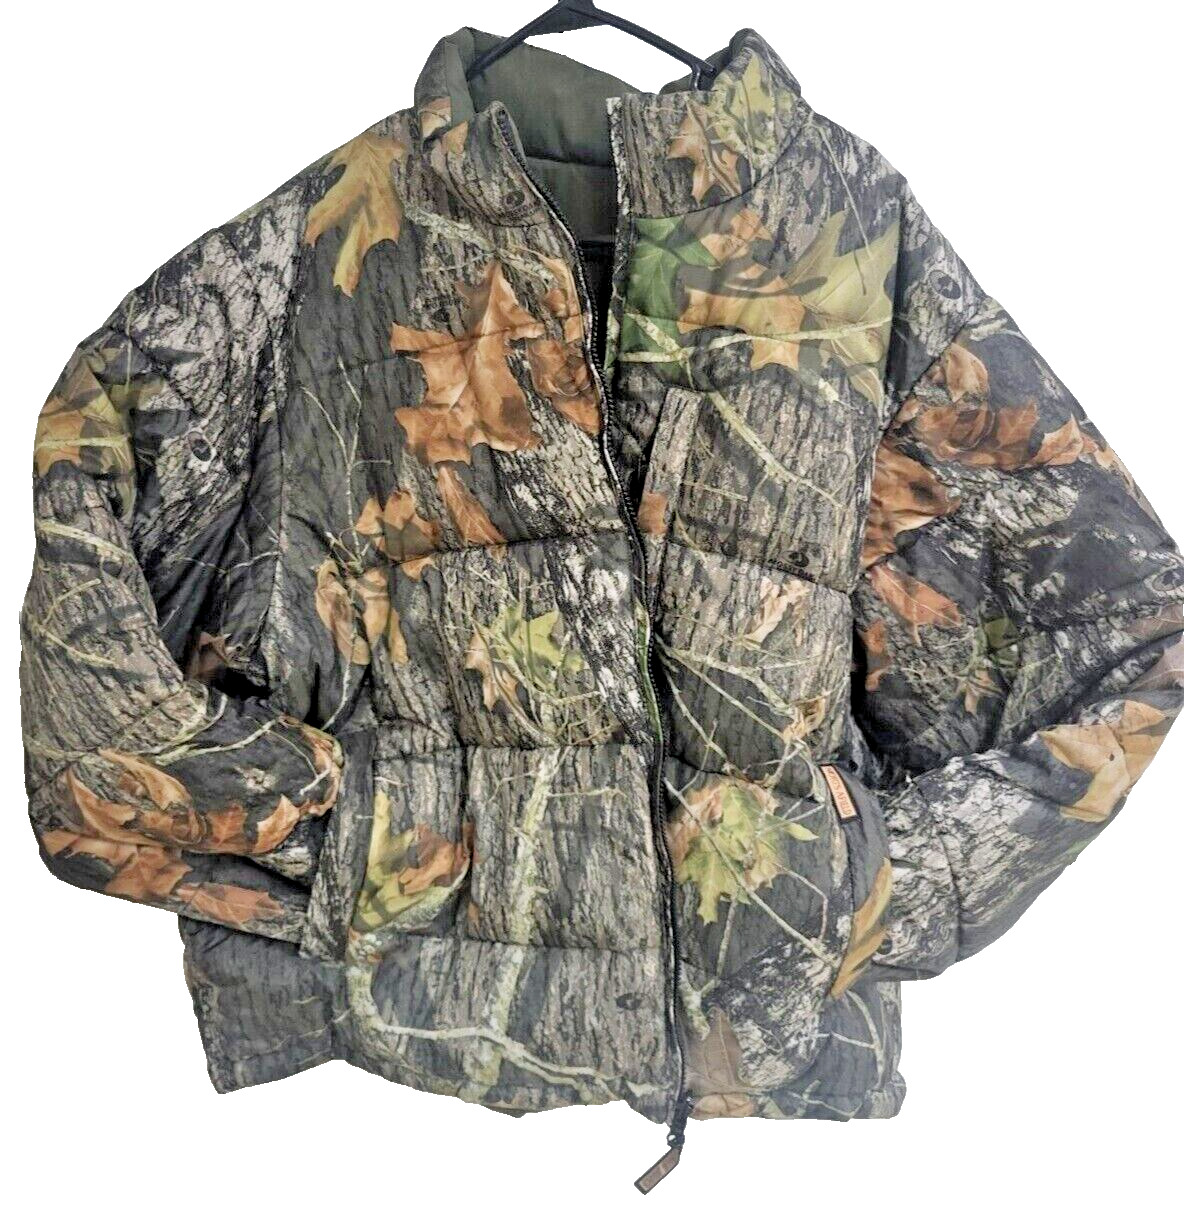 Camo sports afield puffer coat 2XL reversible. No rips or tears. 